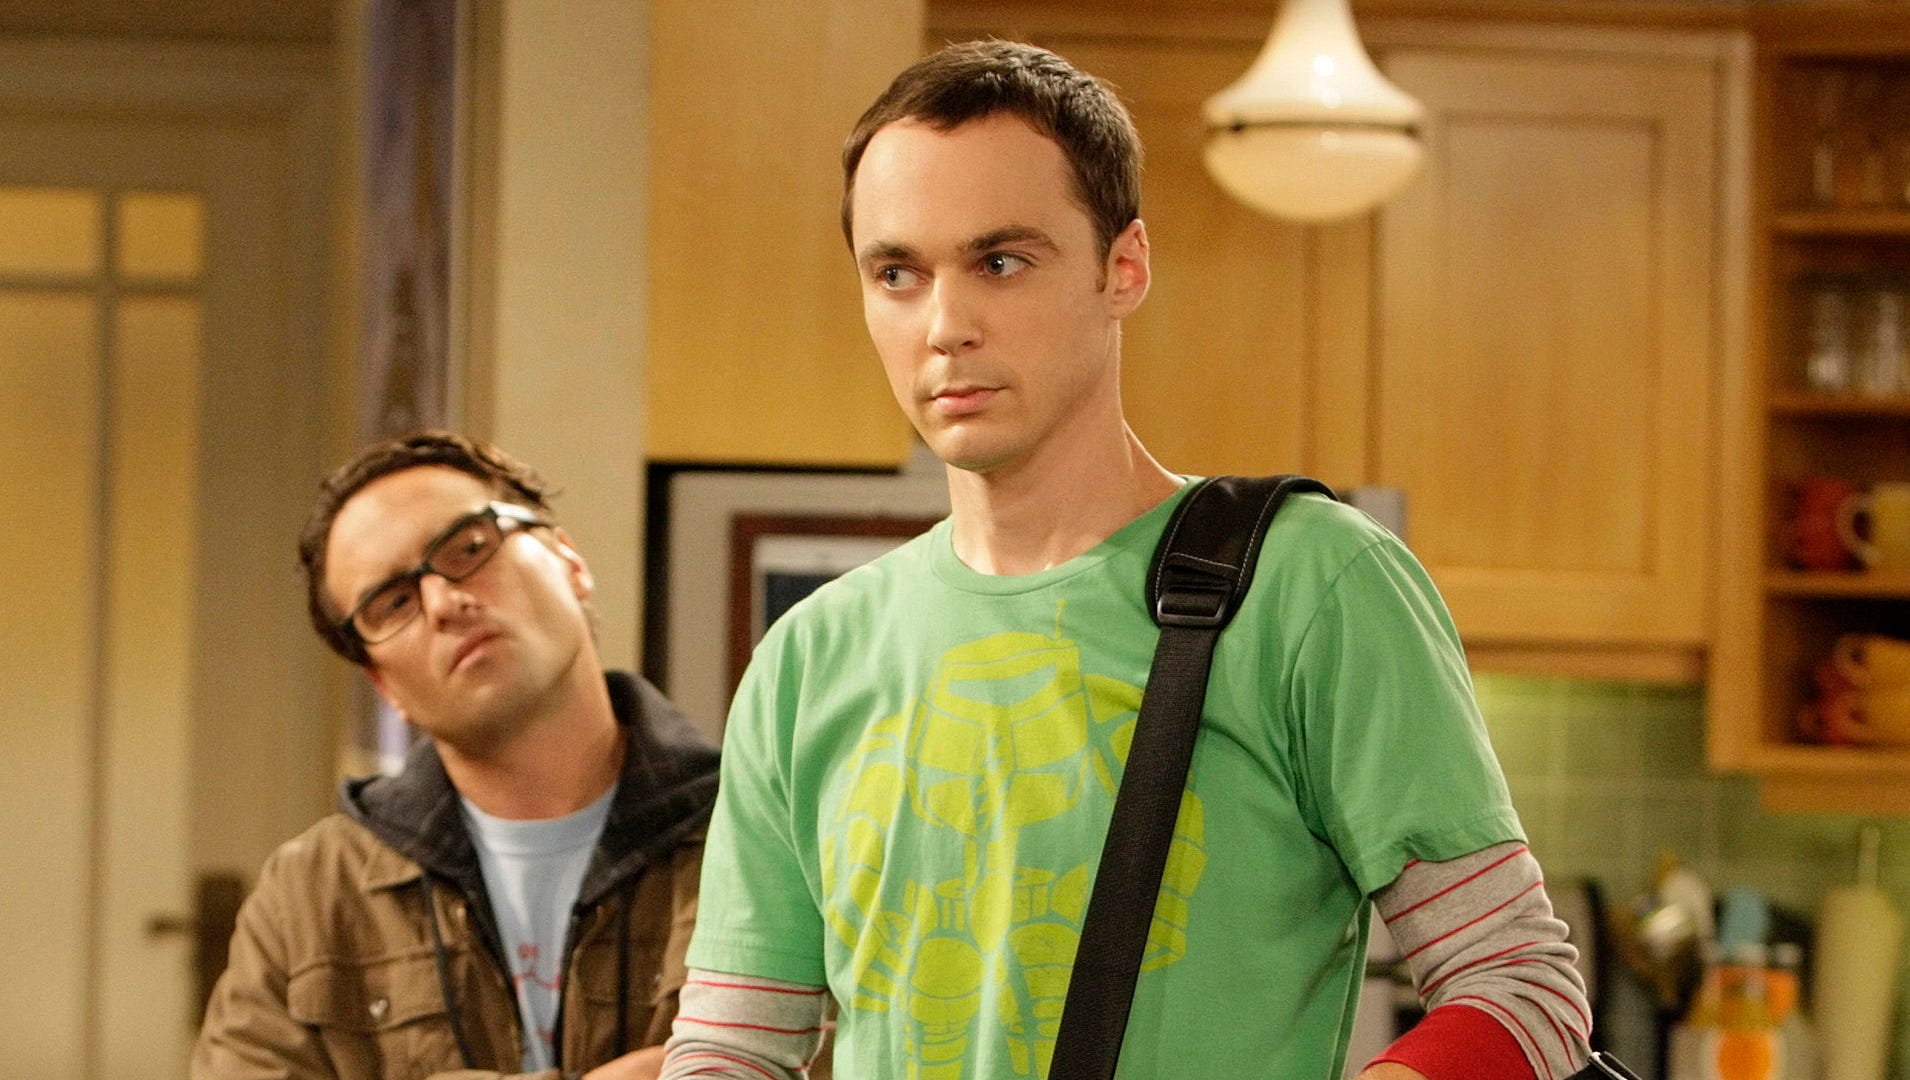 The Big Bang Theory: Jim Parsons on why he exited as Sheldon Cooper